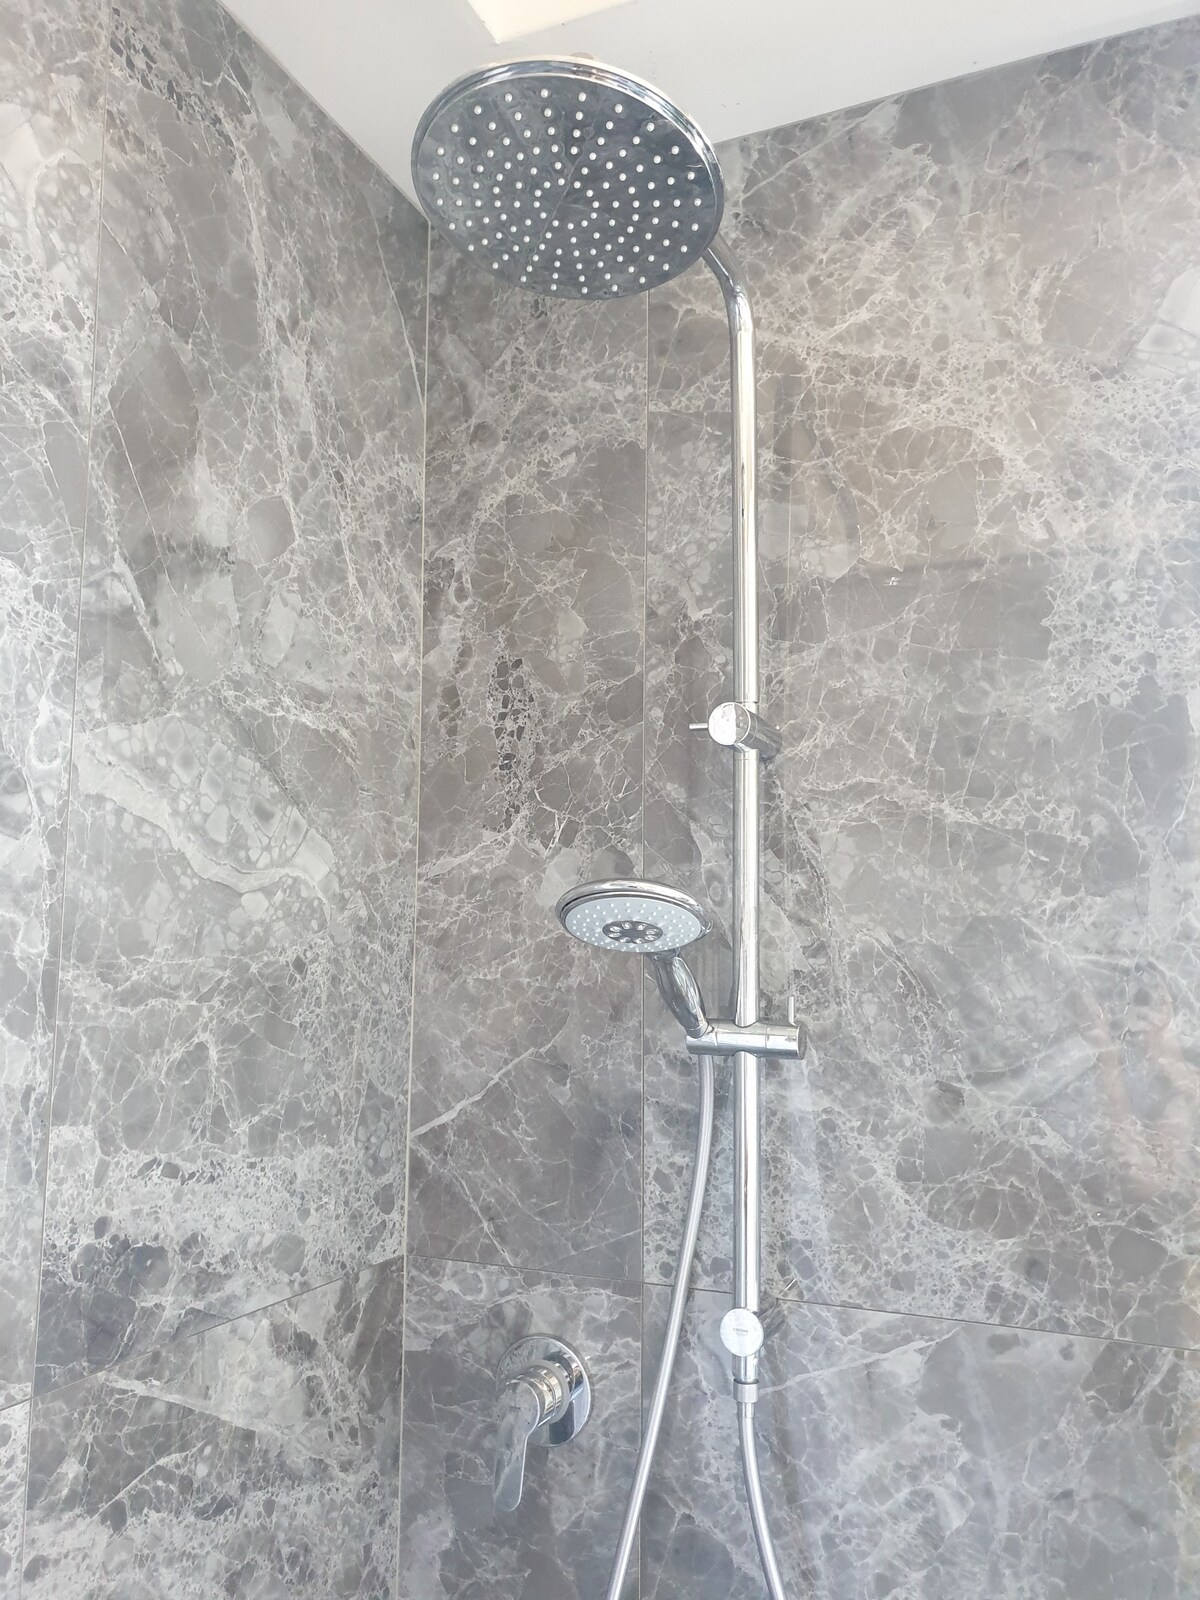  immature Makes Love to Shower Head